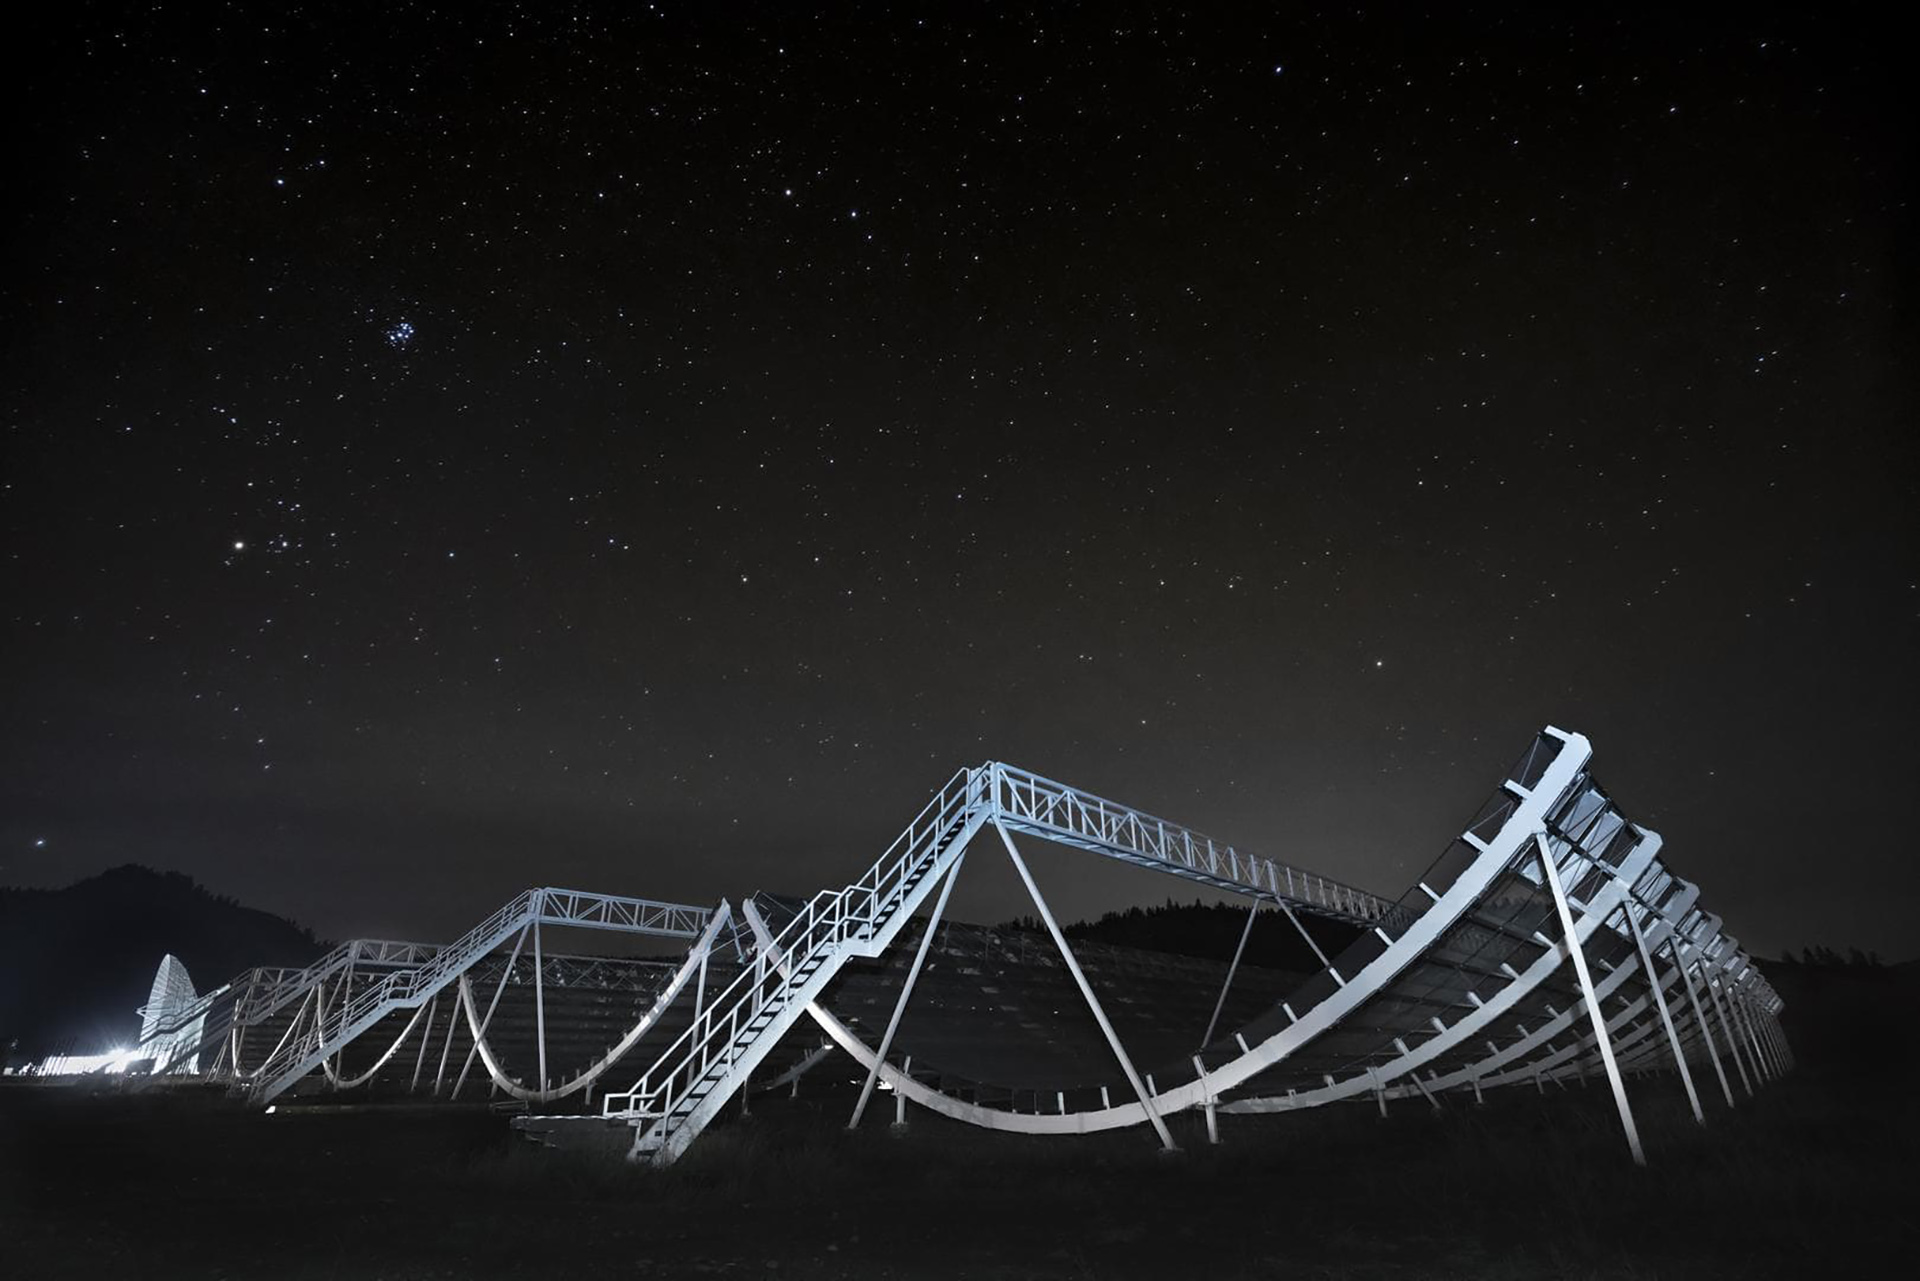 The Canadian Hydrogen Intensity Mapping Experiment, or CHIME, a Canadian radio telescope, is shown at night.